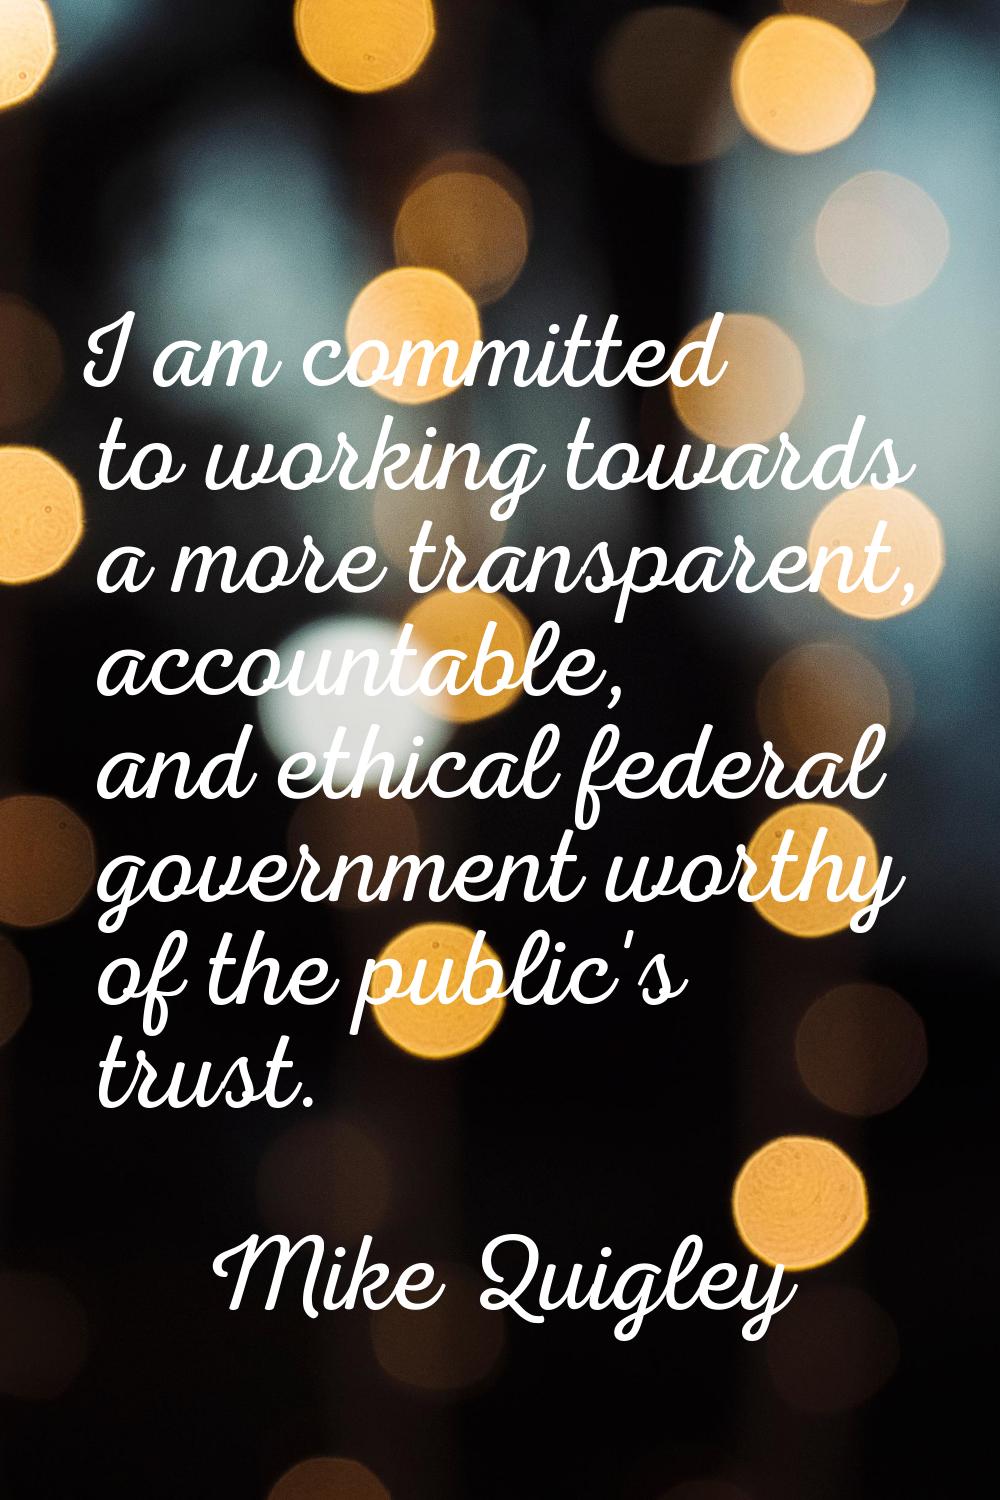 I am committed to working towards a more transparent, accountable, and ethical federal government w